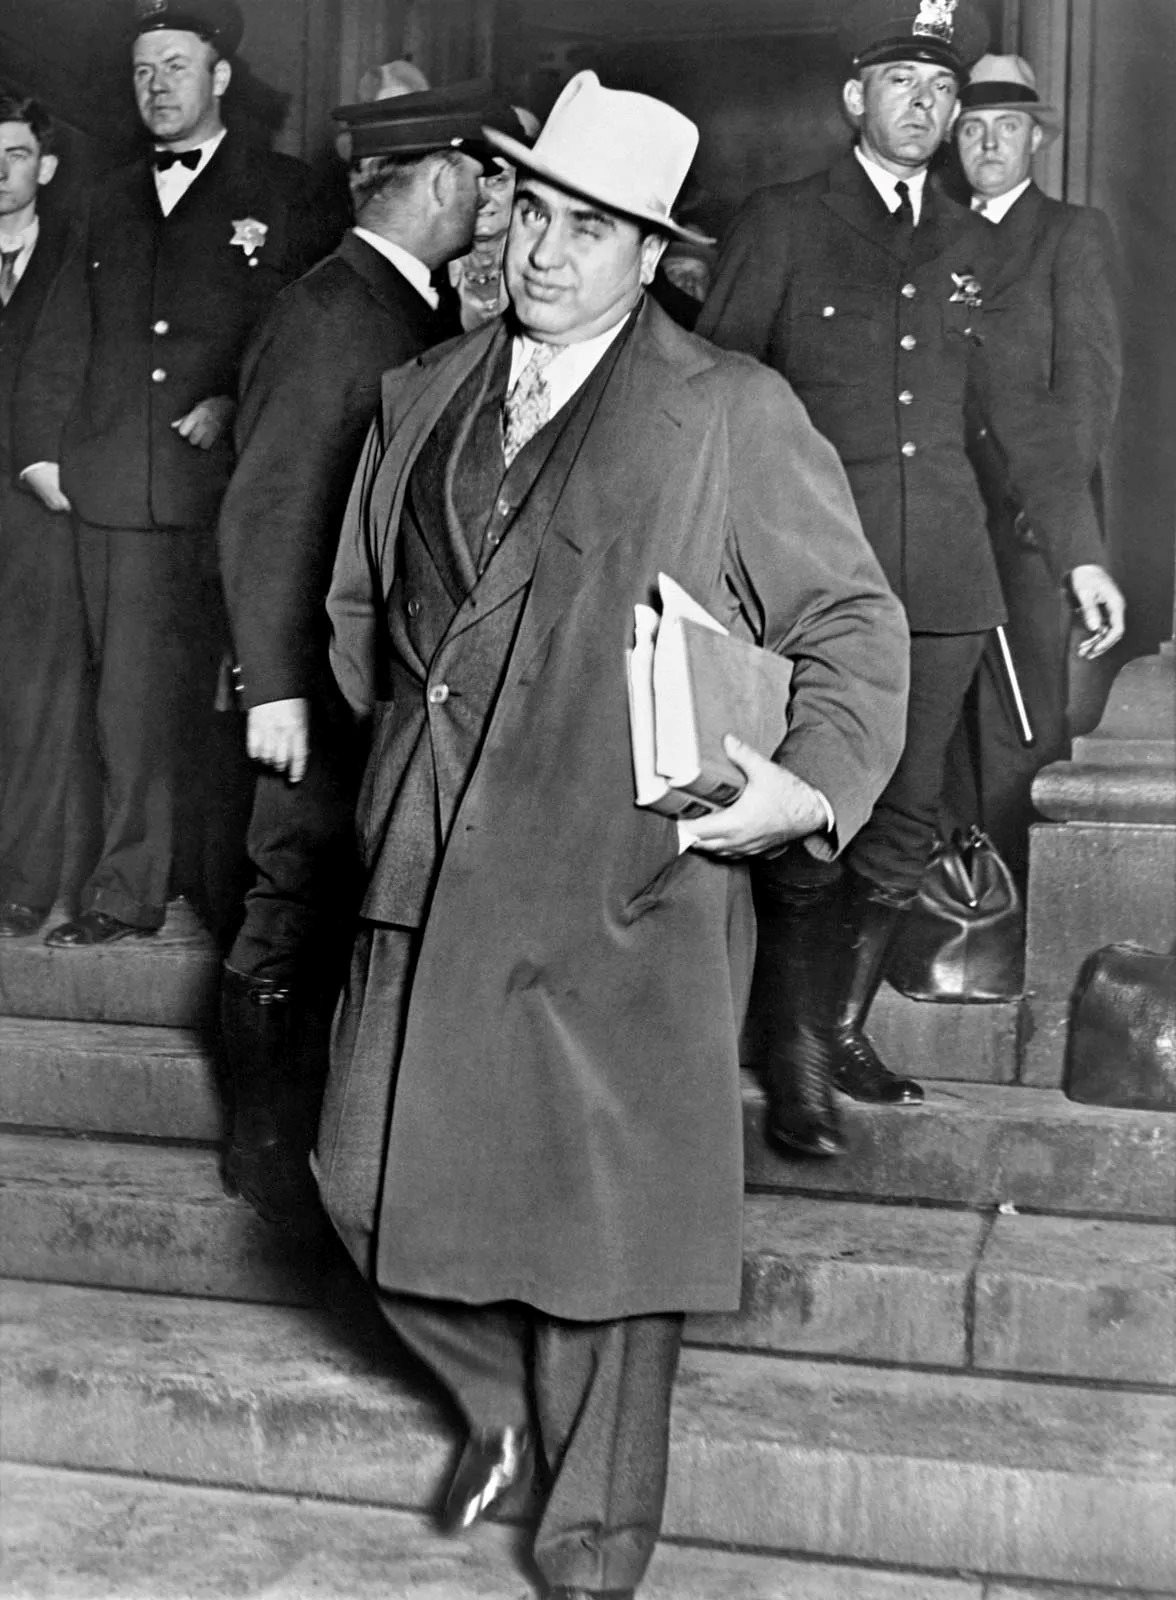 al-capone-courthouse-chicago-october-14-1931_11zon.jpg